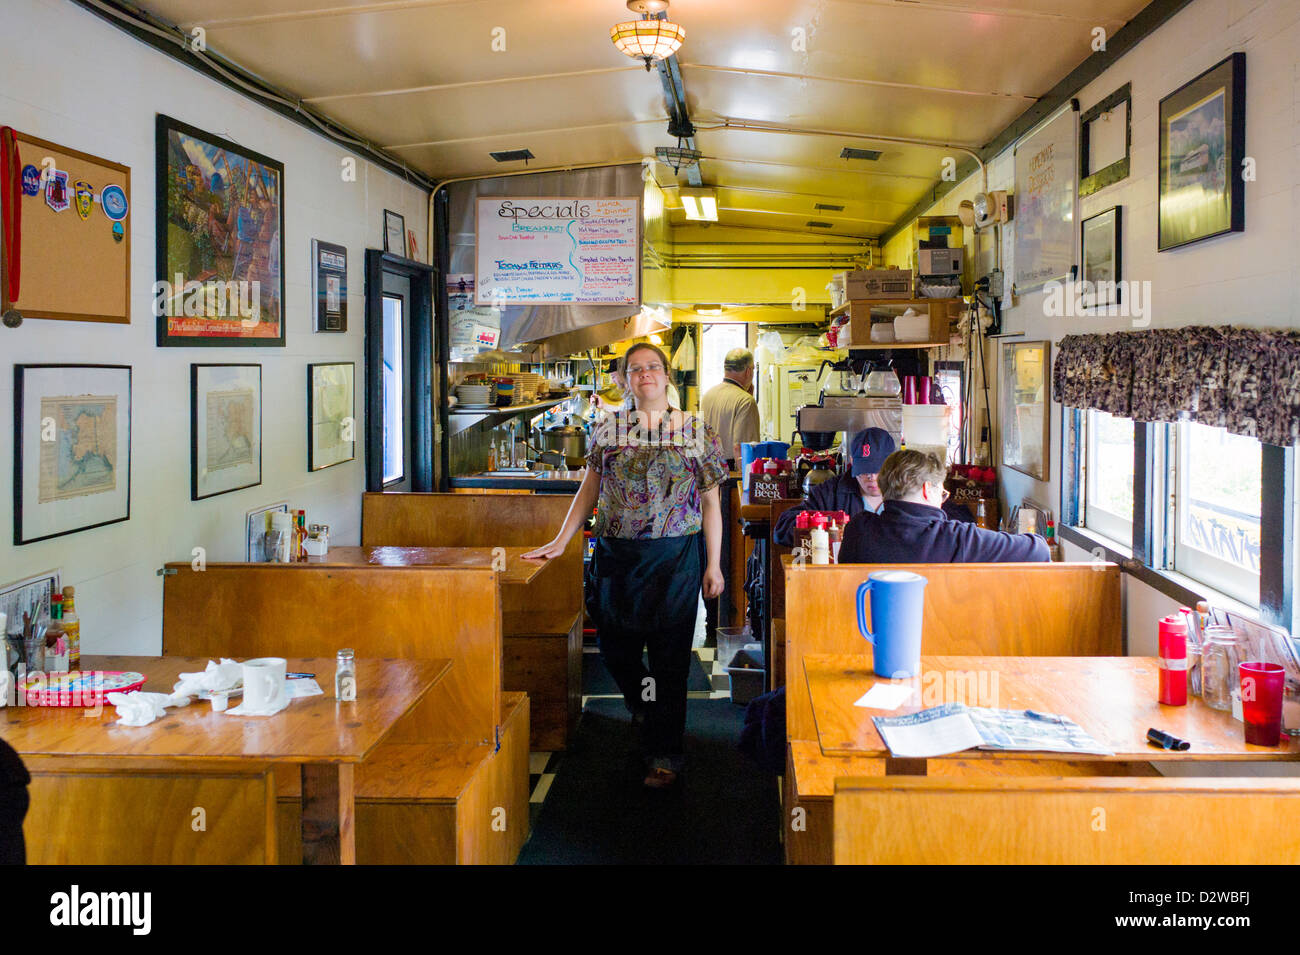 Waitress pauses for photograph,interior view of The Smoke Shack restaurant, located in an old railroad train car, Seward, AK Stock Photo